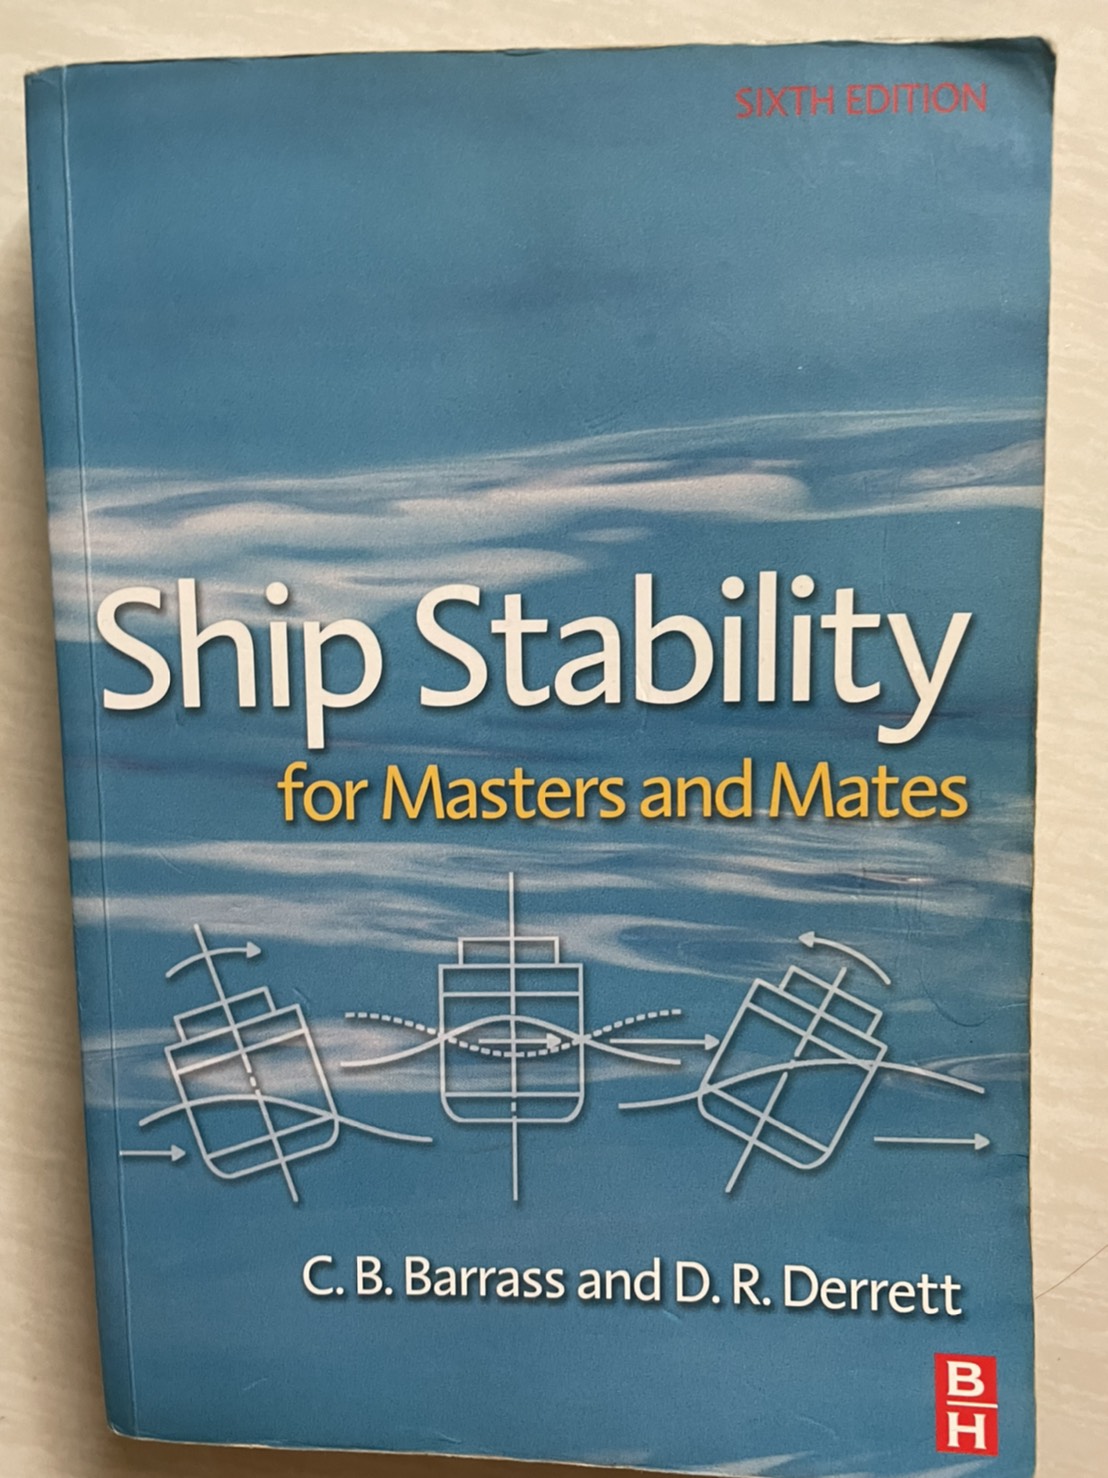 Ship Stability for Masters and Mates 詳細資料